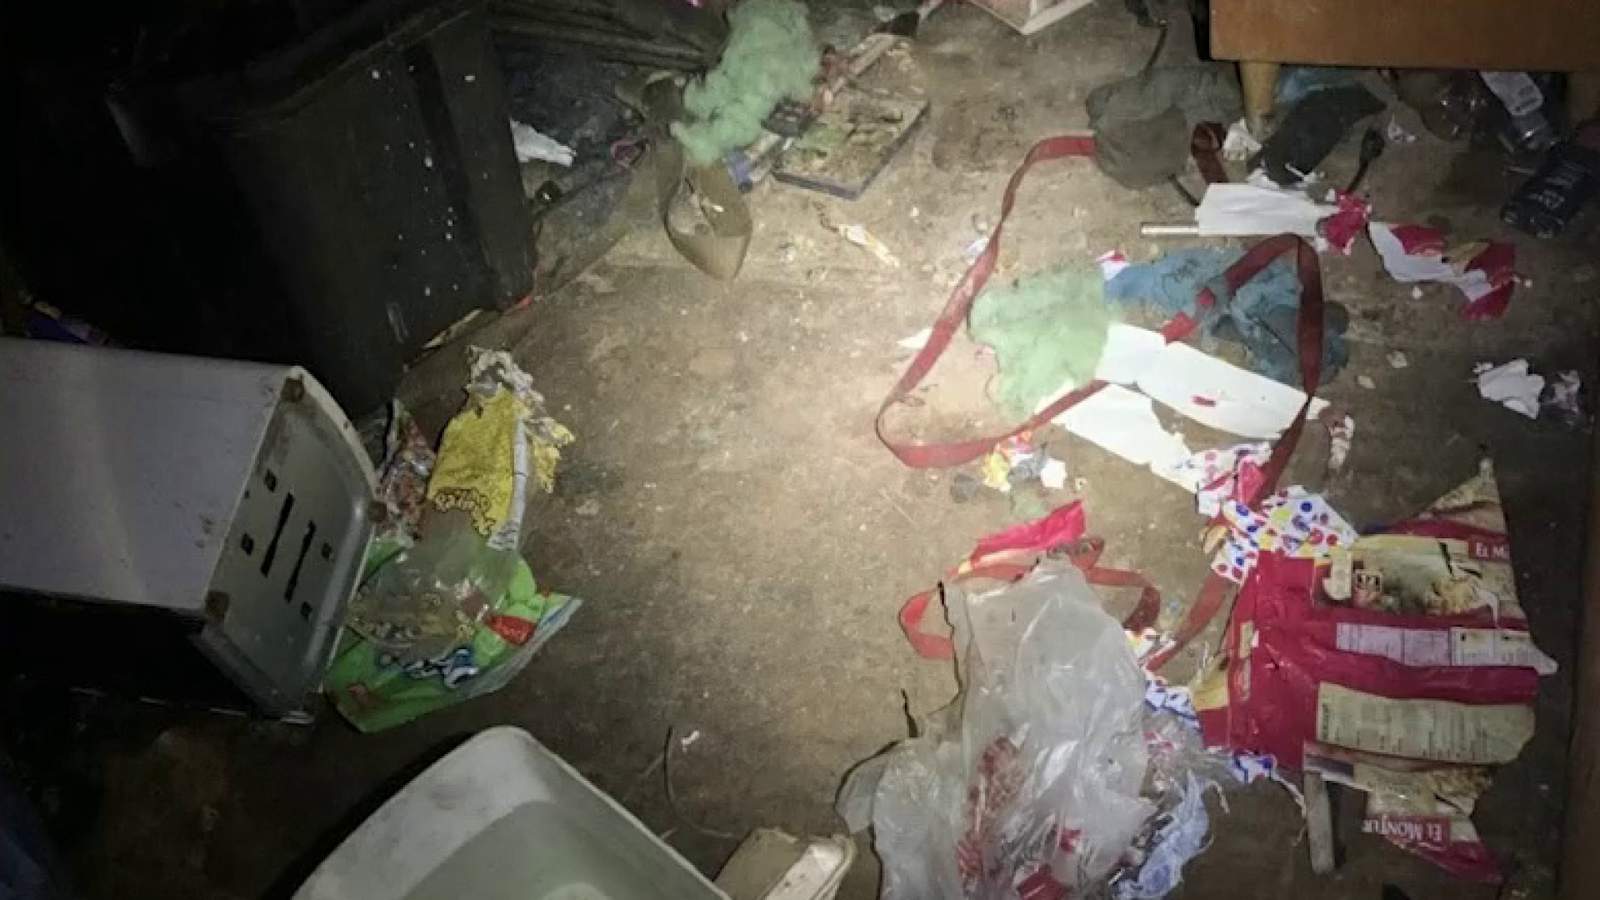 Dogs ate chips of wood, feces, plastic as owner starved them to death, sheriff says